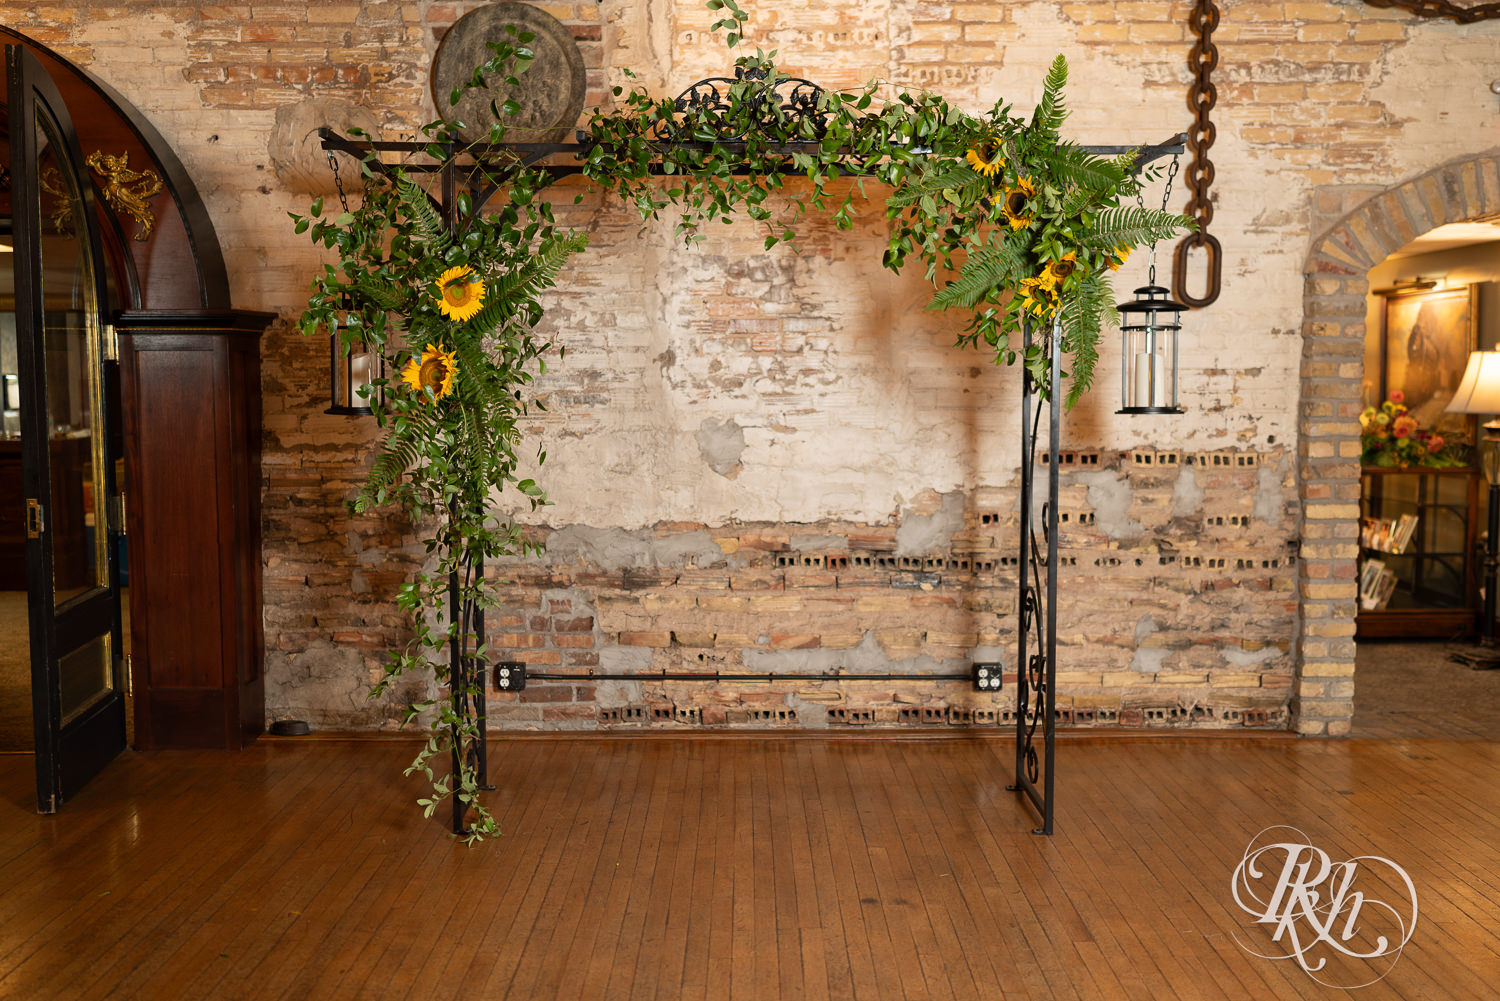 Wedding ceremony arch with sunflowers at Kellerman's Event Center in White Bear Lake, Minnesota.